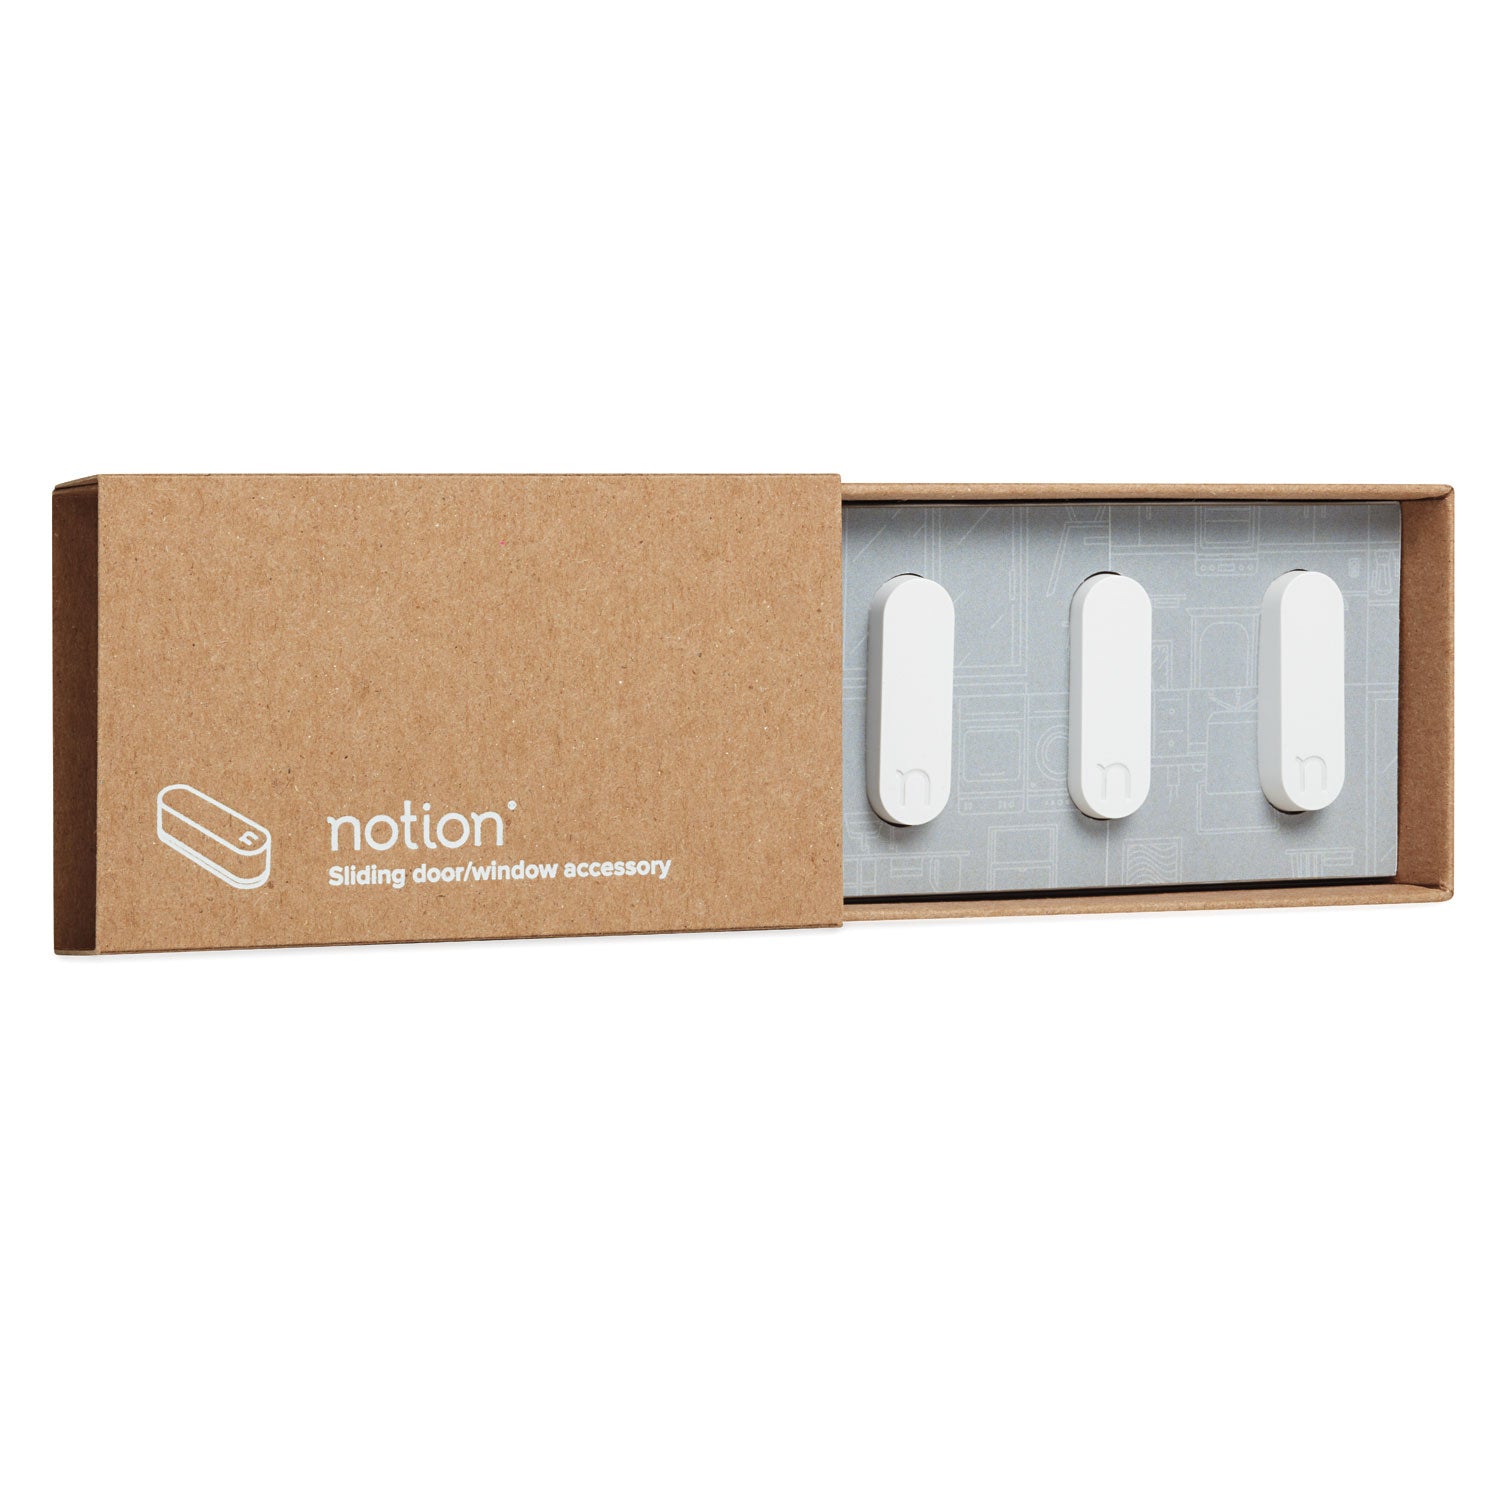 Notion Magnets - Notion